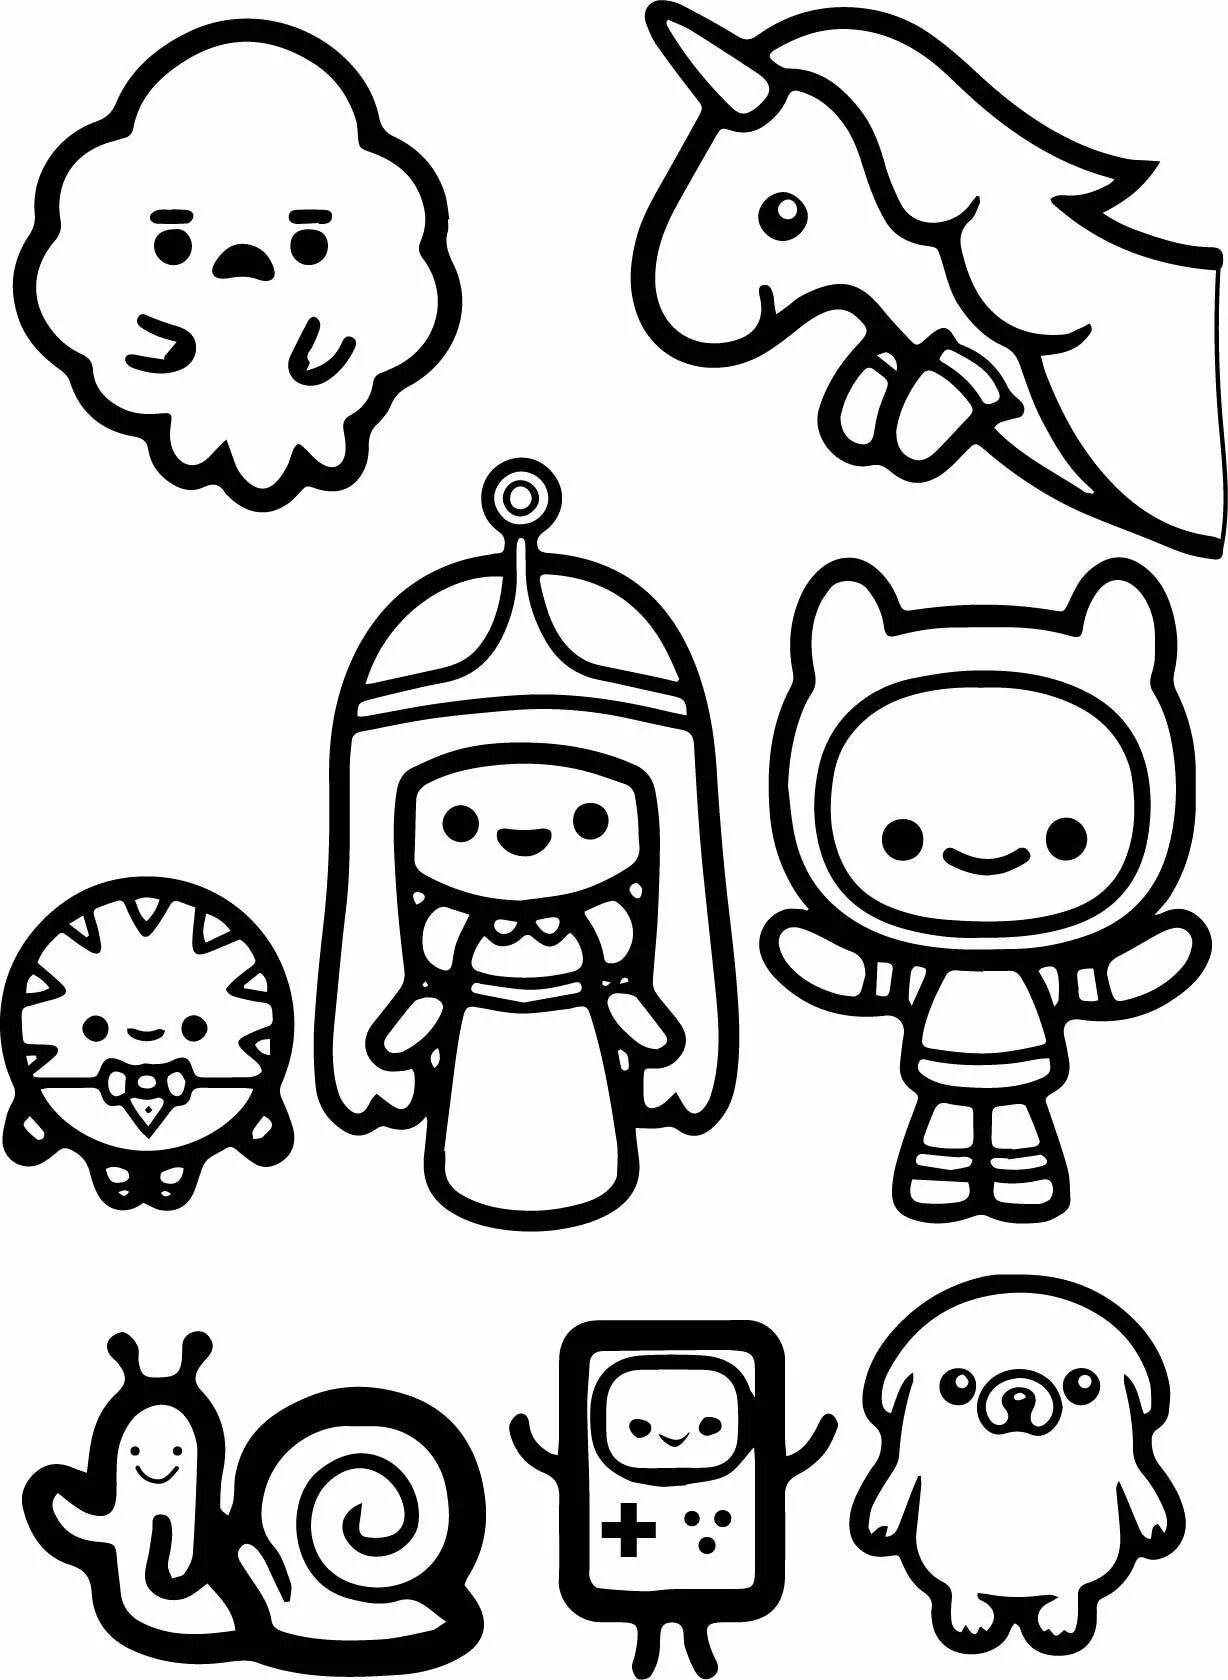 Small designs for stickers #6